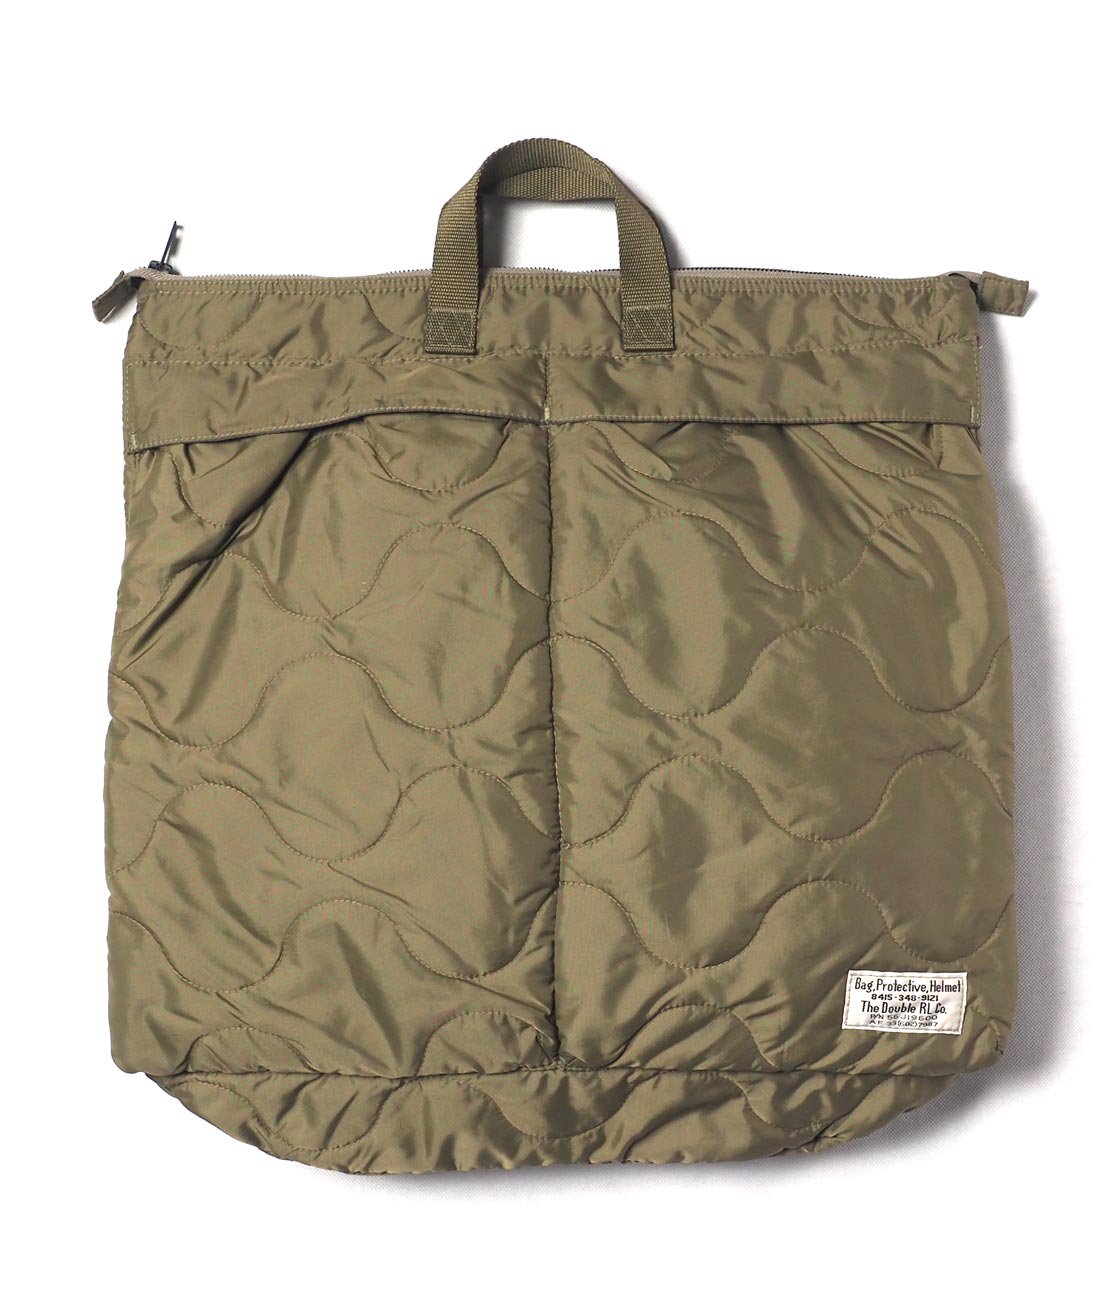 RRL】QUILTED HELMET BAG - AIRFORCE SAGE GREEN ヘルメットバッグ